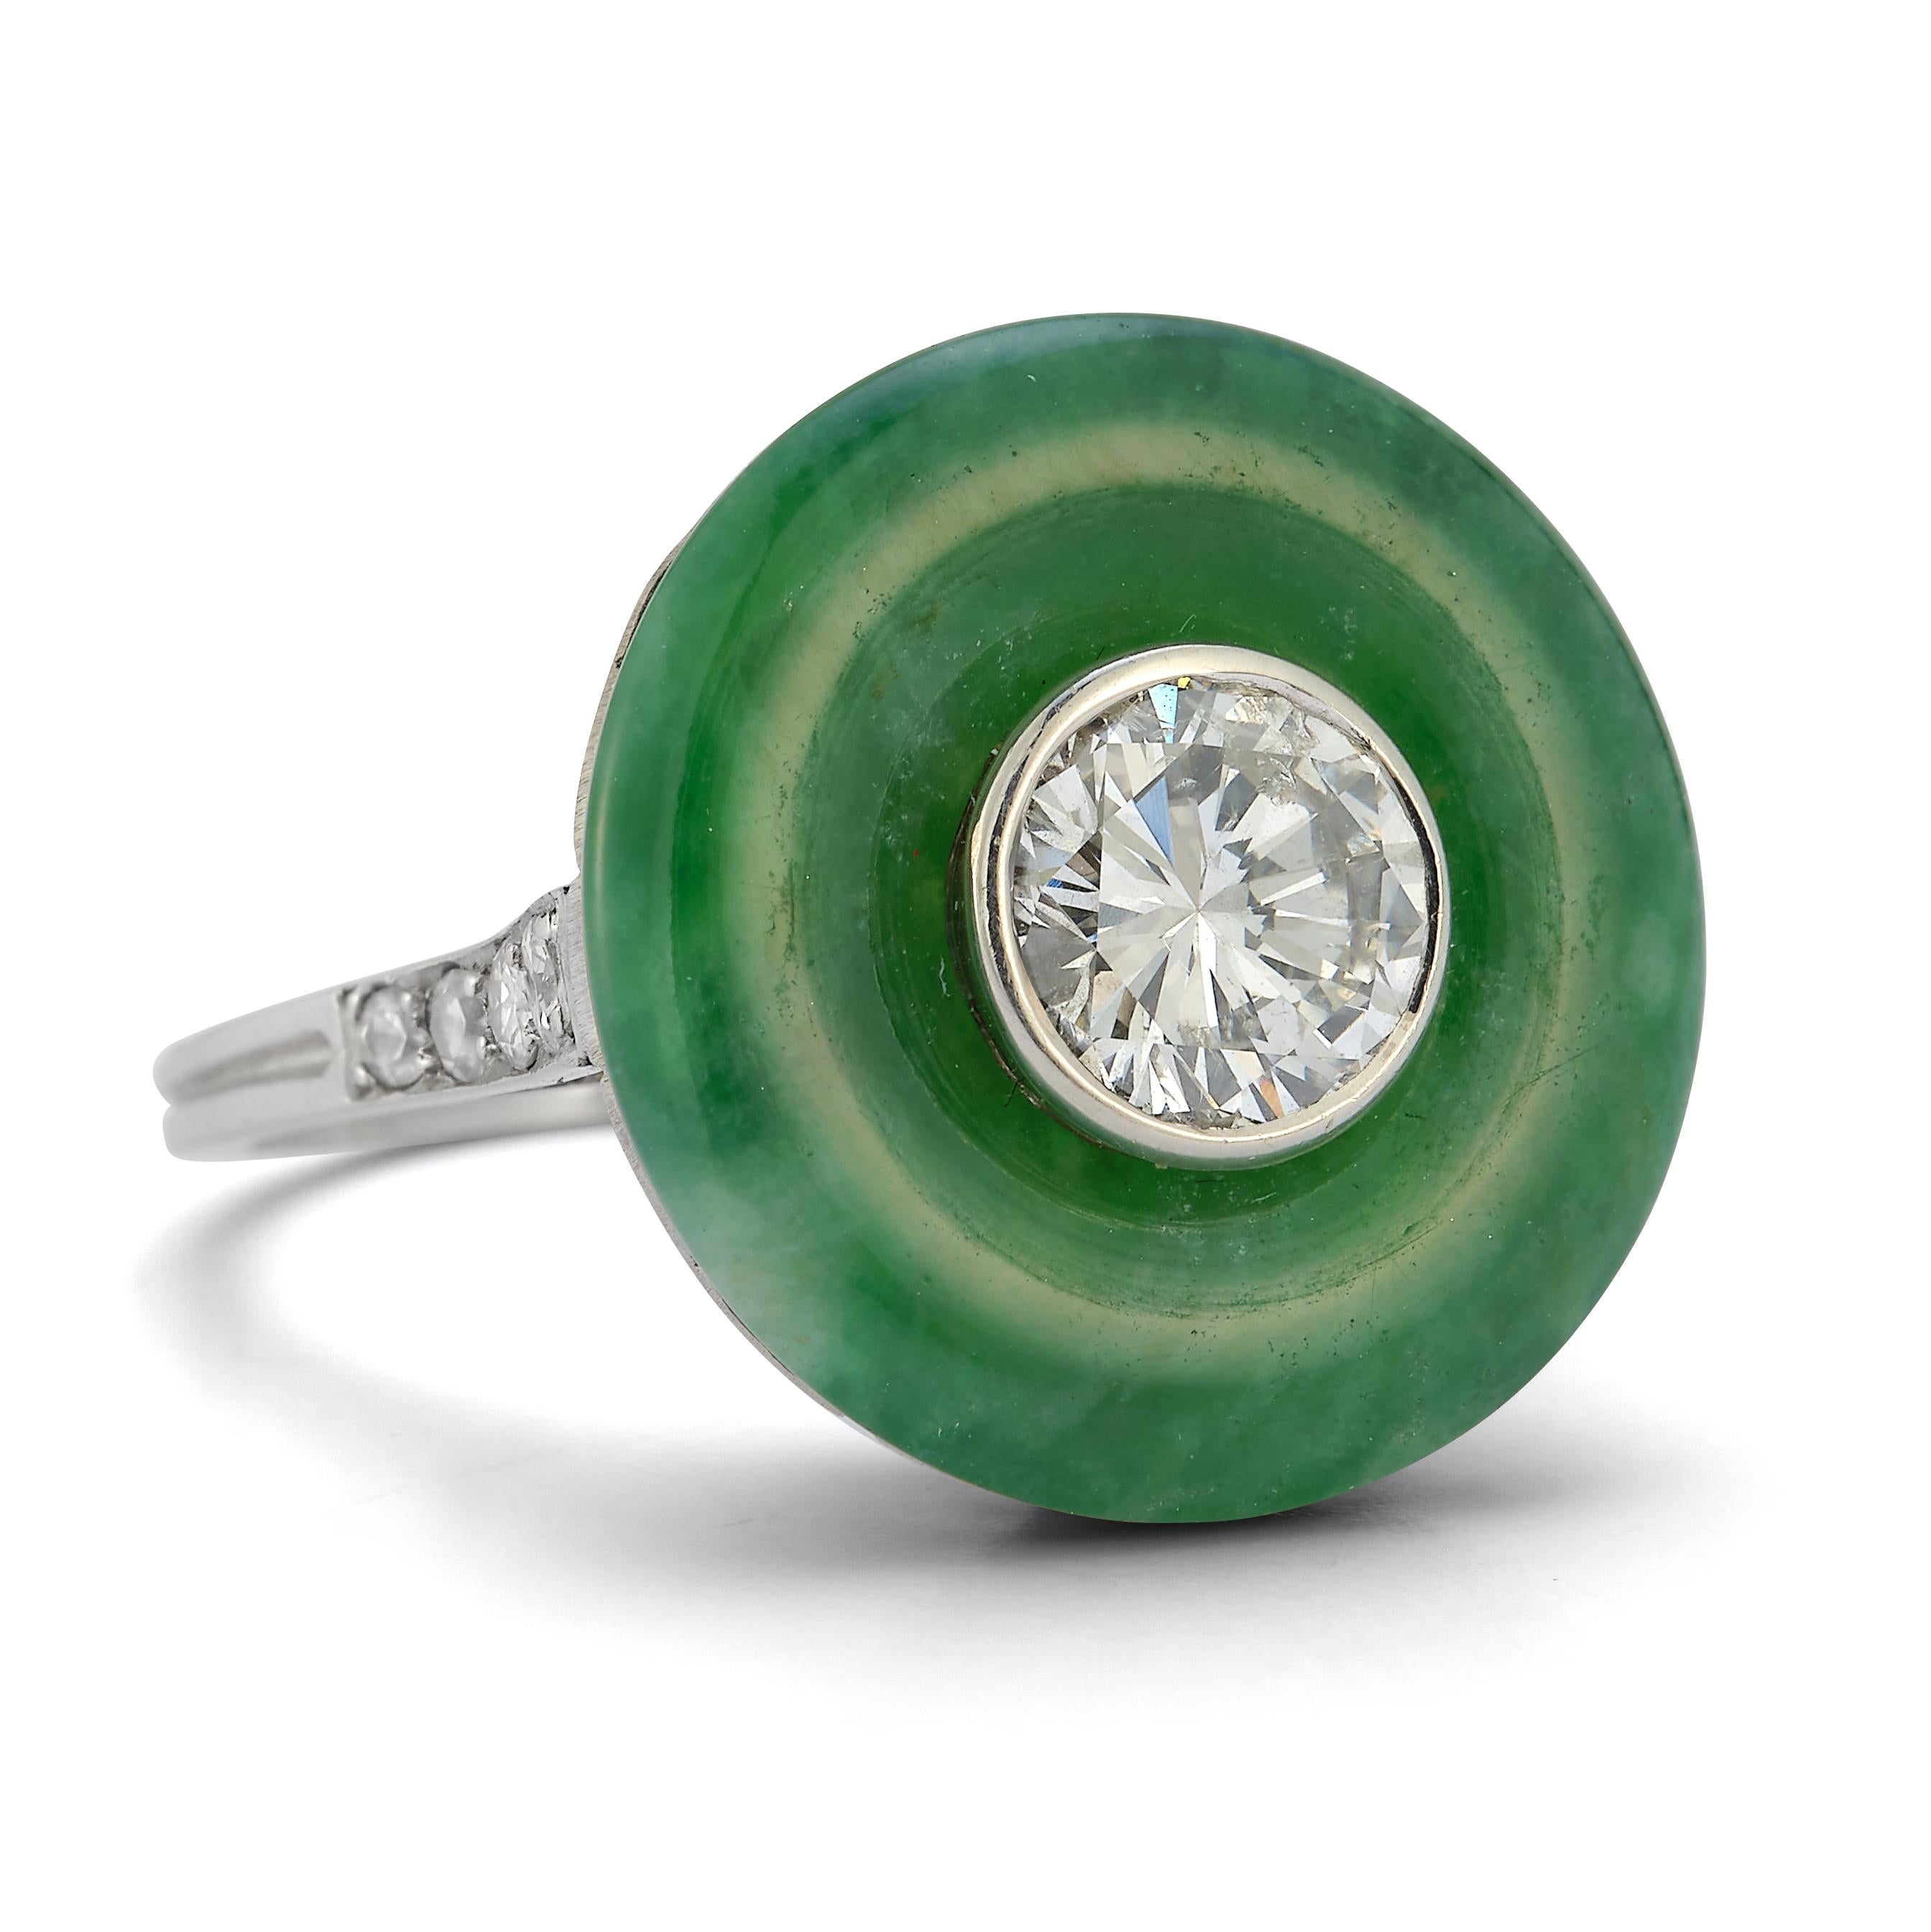 French Art Deco Jade Diamond Ring

Center Diamond approx 1.02 ct

Set in Platinum. French Stamp

Made In France Circa 1925

Sizable to any size